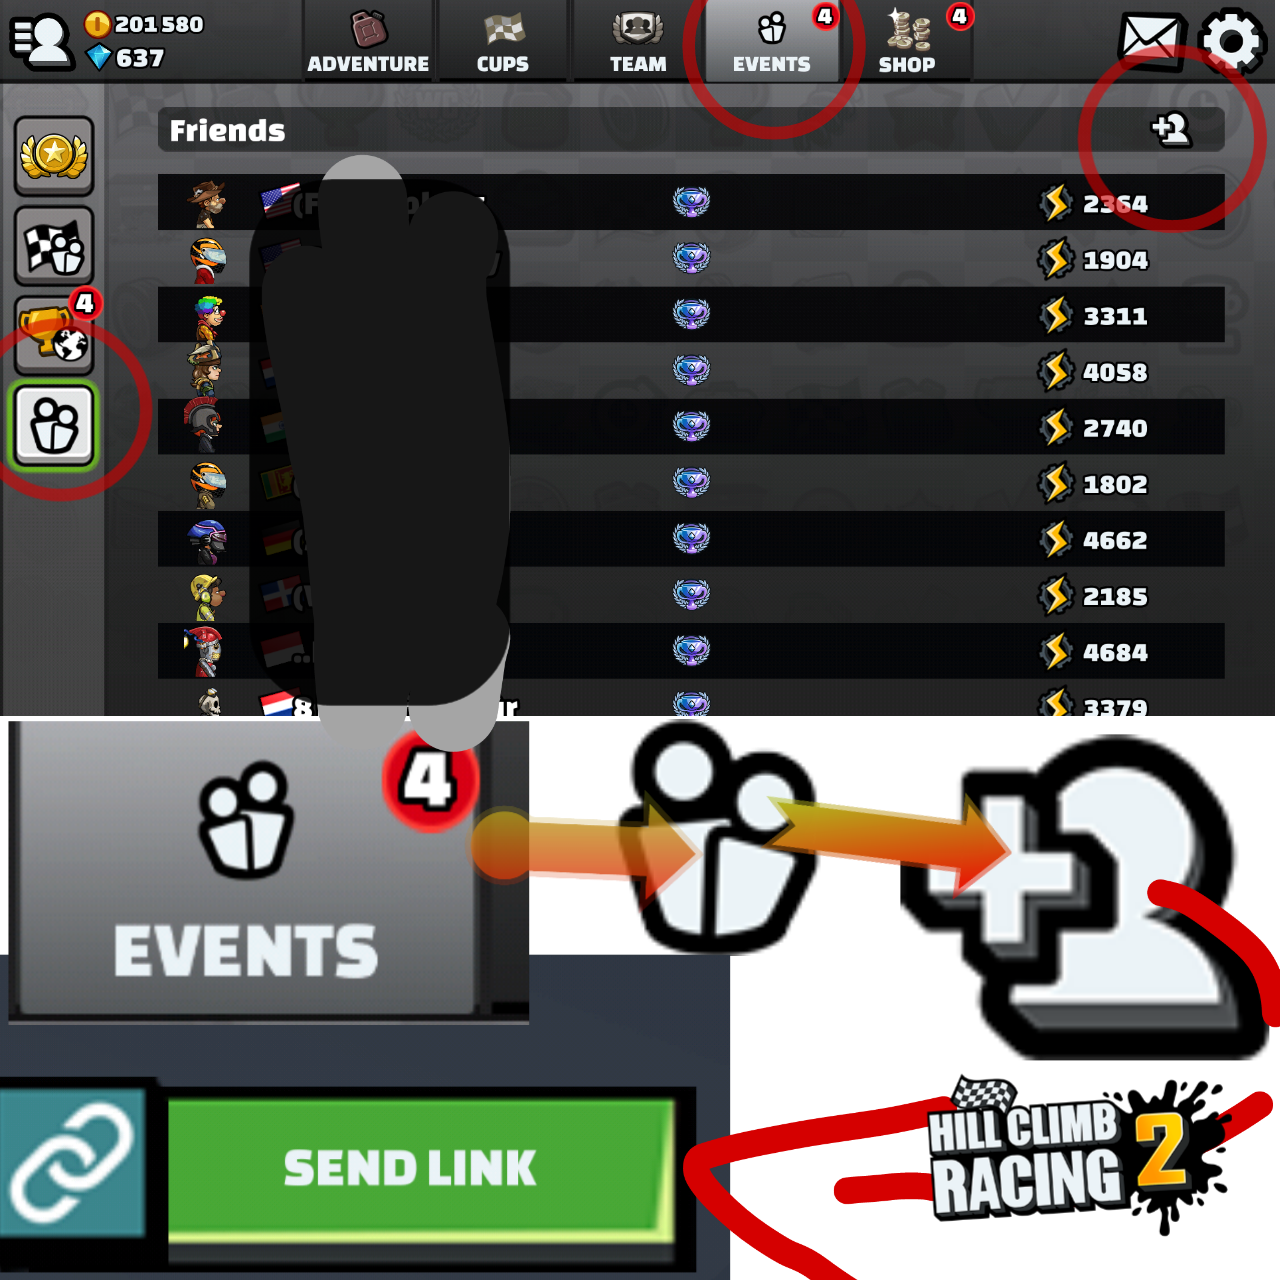 Hill Climb Racing 2 Best Vehicle and Some Tips Sharing of It